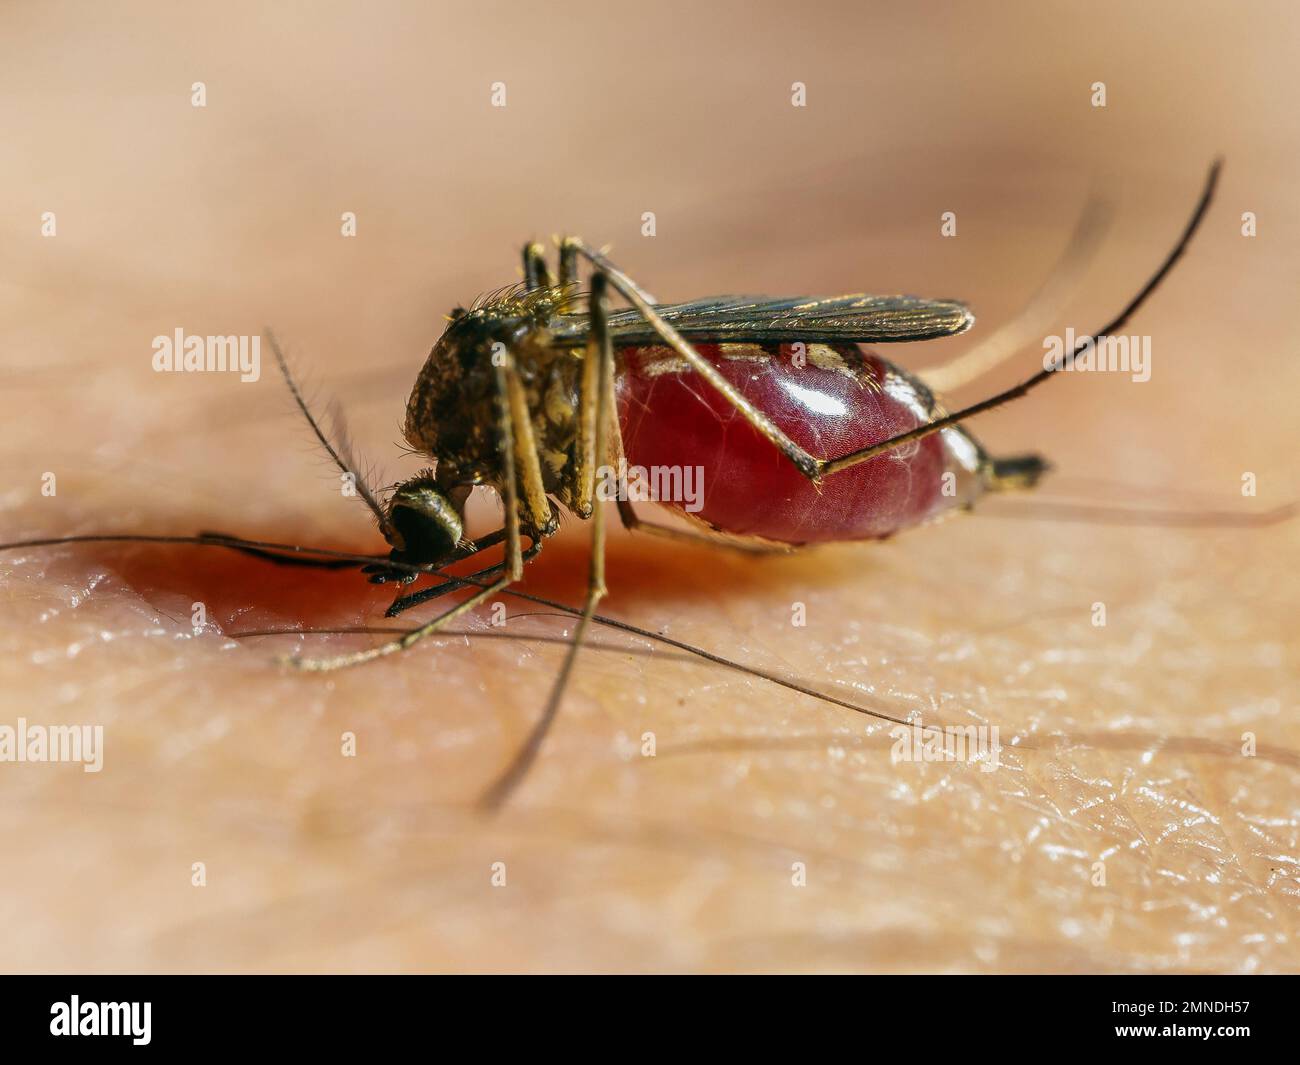 Close-up of a Culex mosquito biting human skin, abdomen full of blood visible. Stock Photo